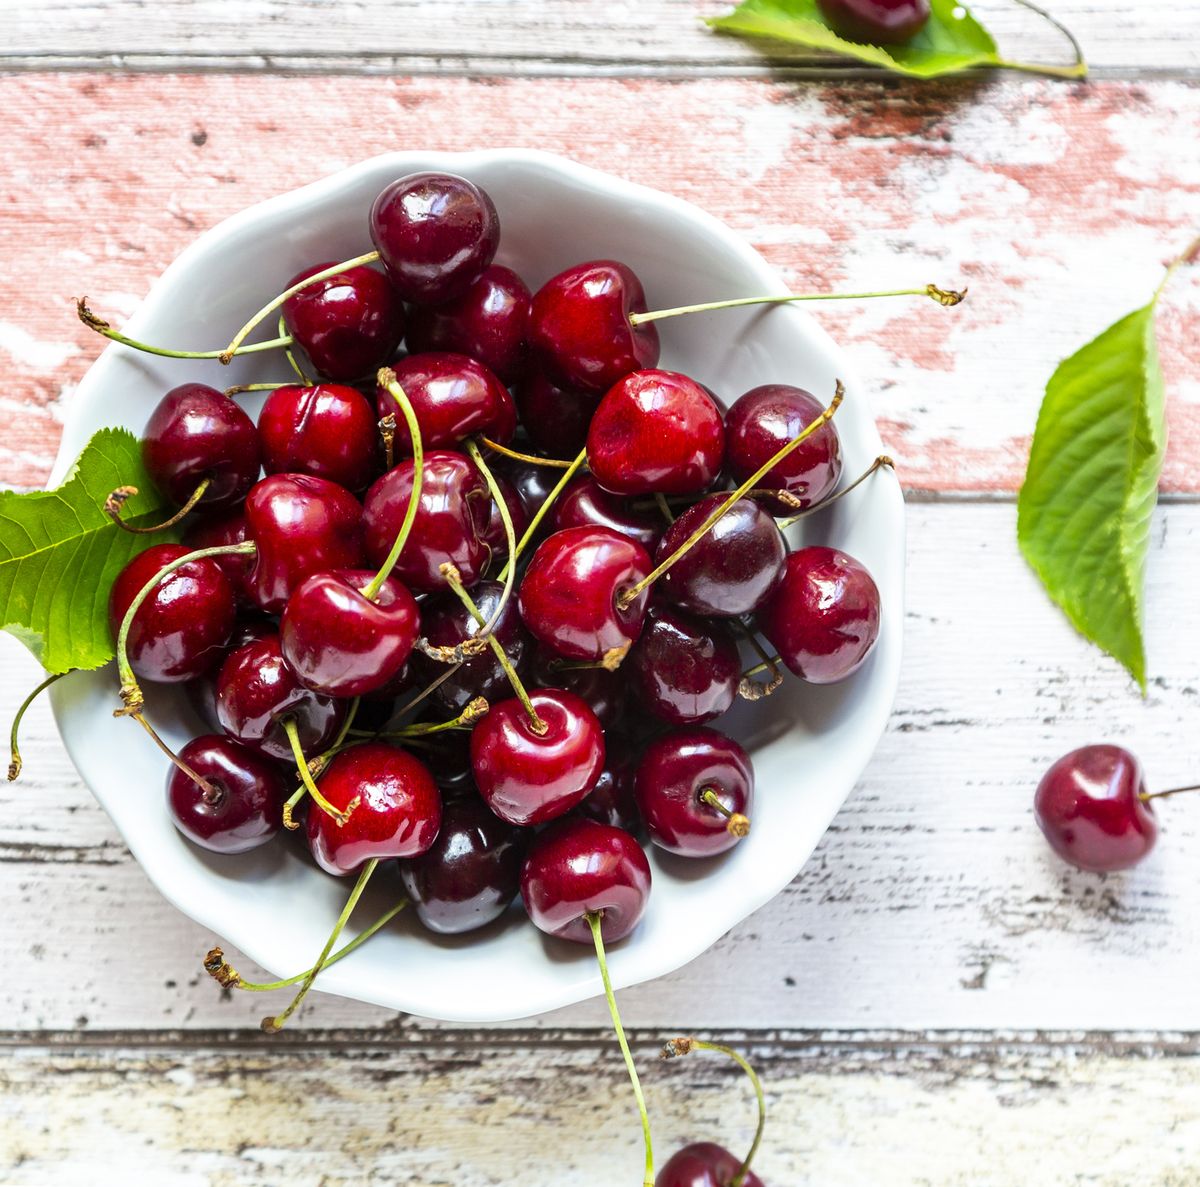 Are cherries good for you?